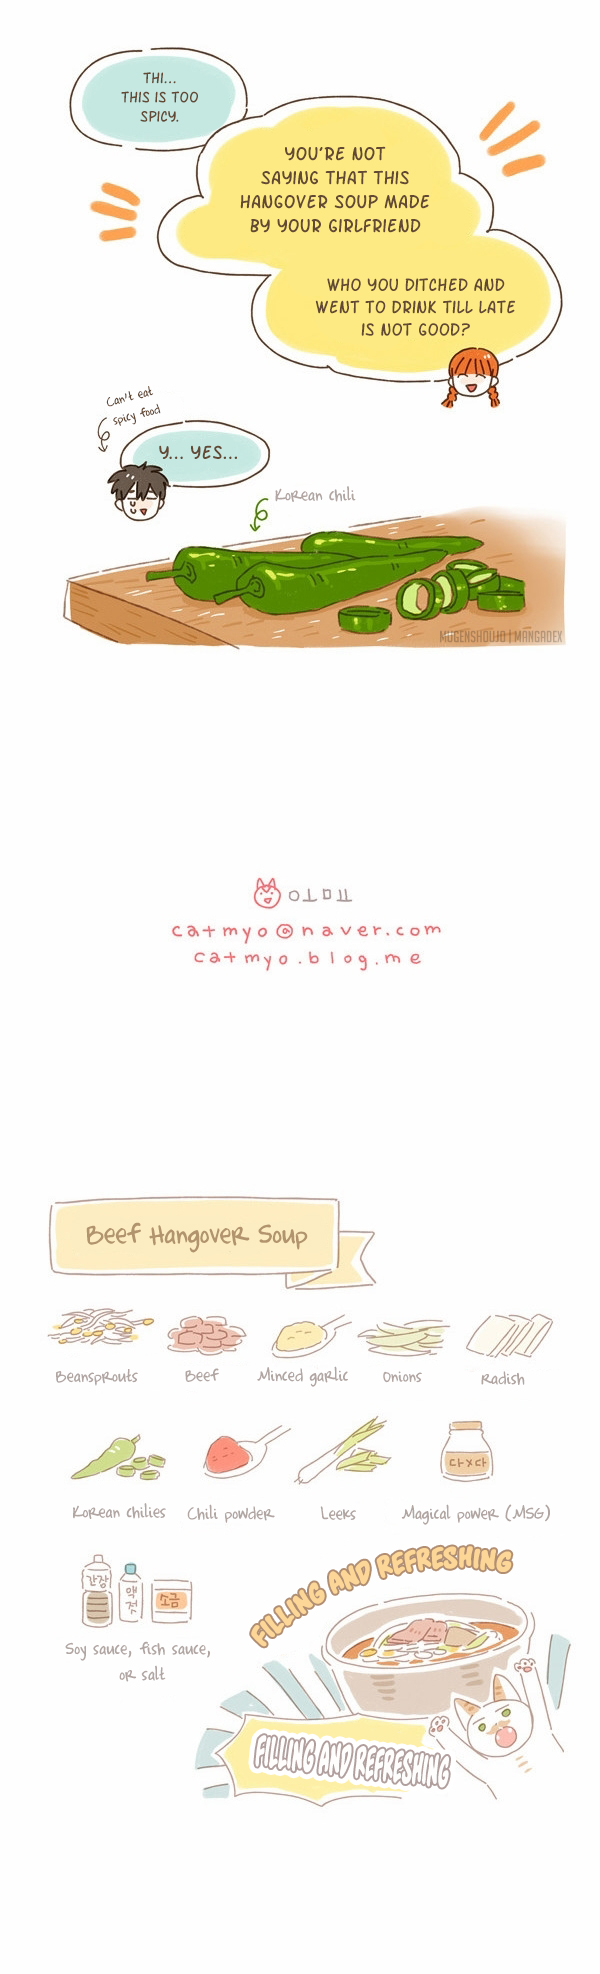 Are You Going to Eat? Ch. 7 Hangover Soup